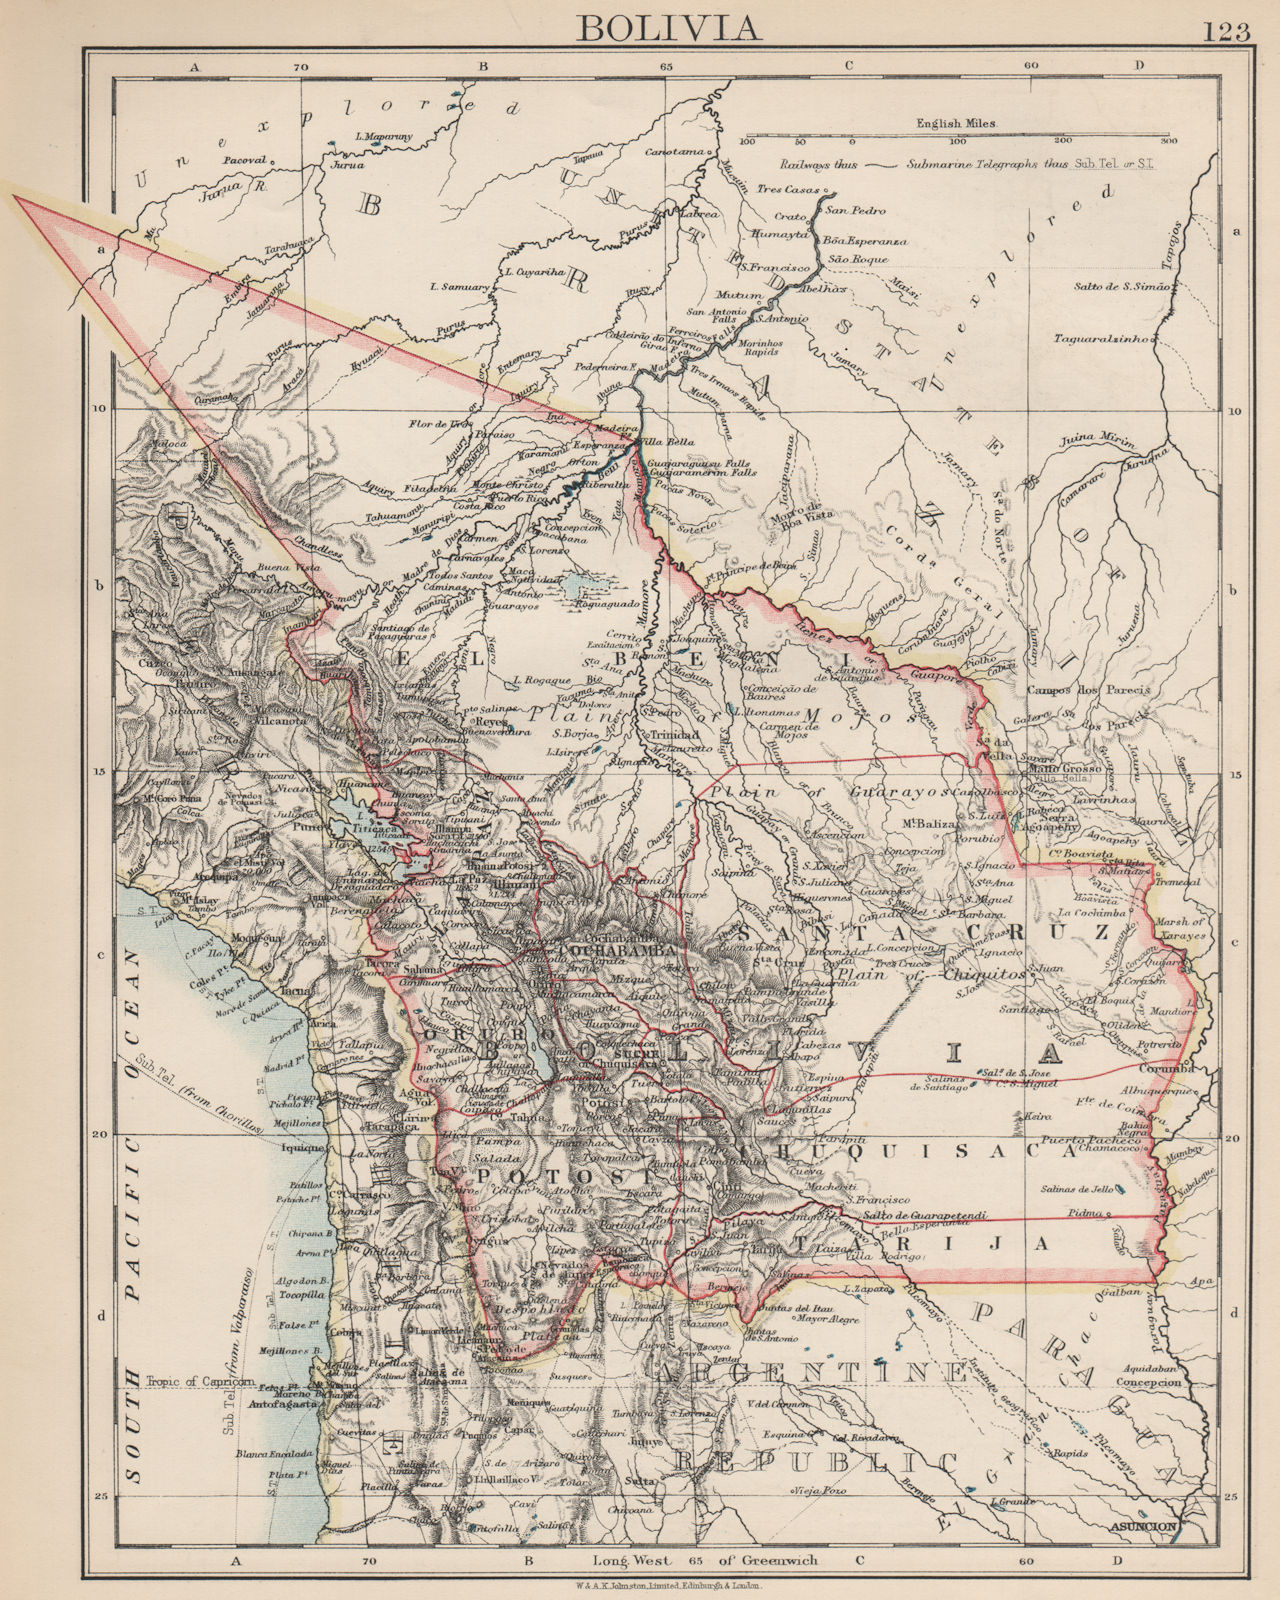 Associate Product BOLIVIA. includes Acre, lost to Brazil in 1899-1903 war. JOHNSTON 1903 old map